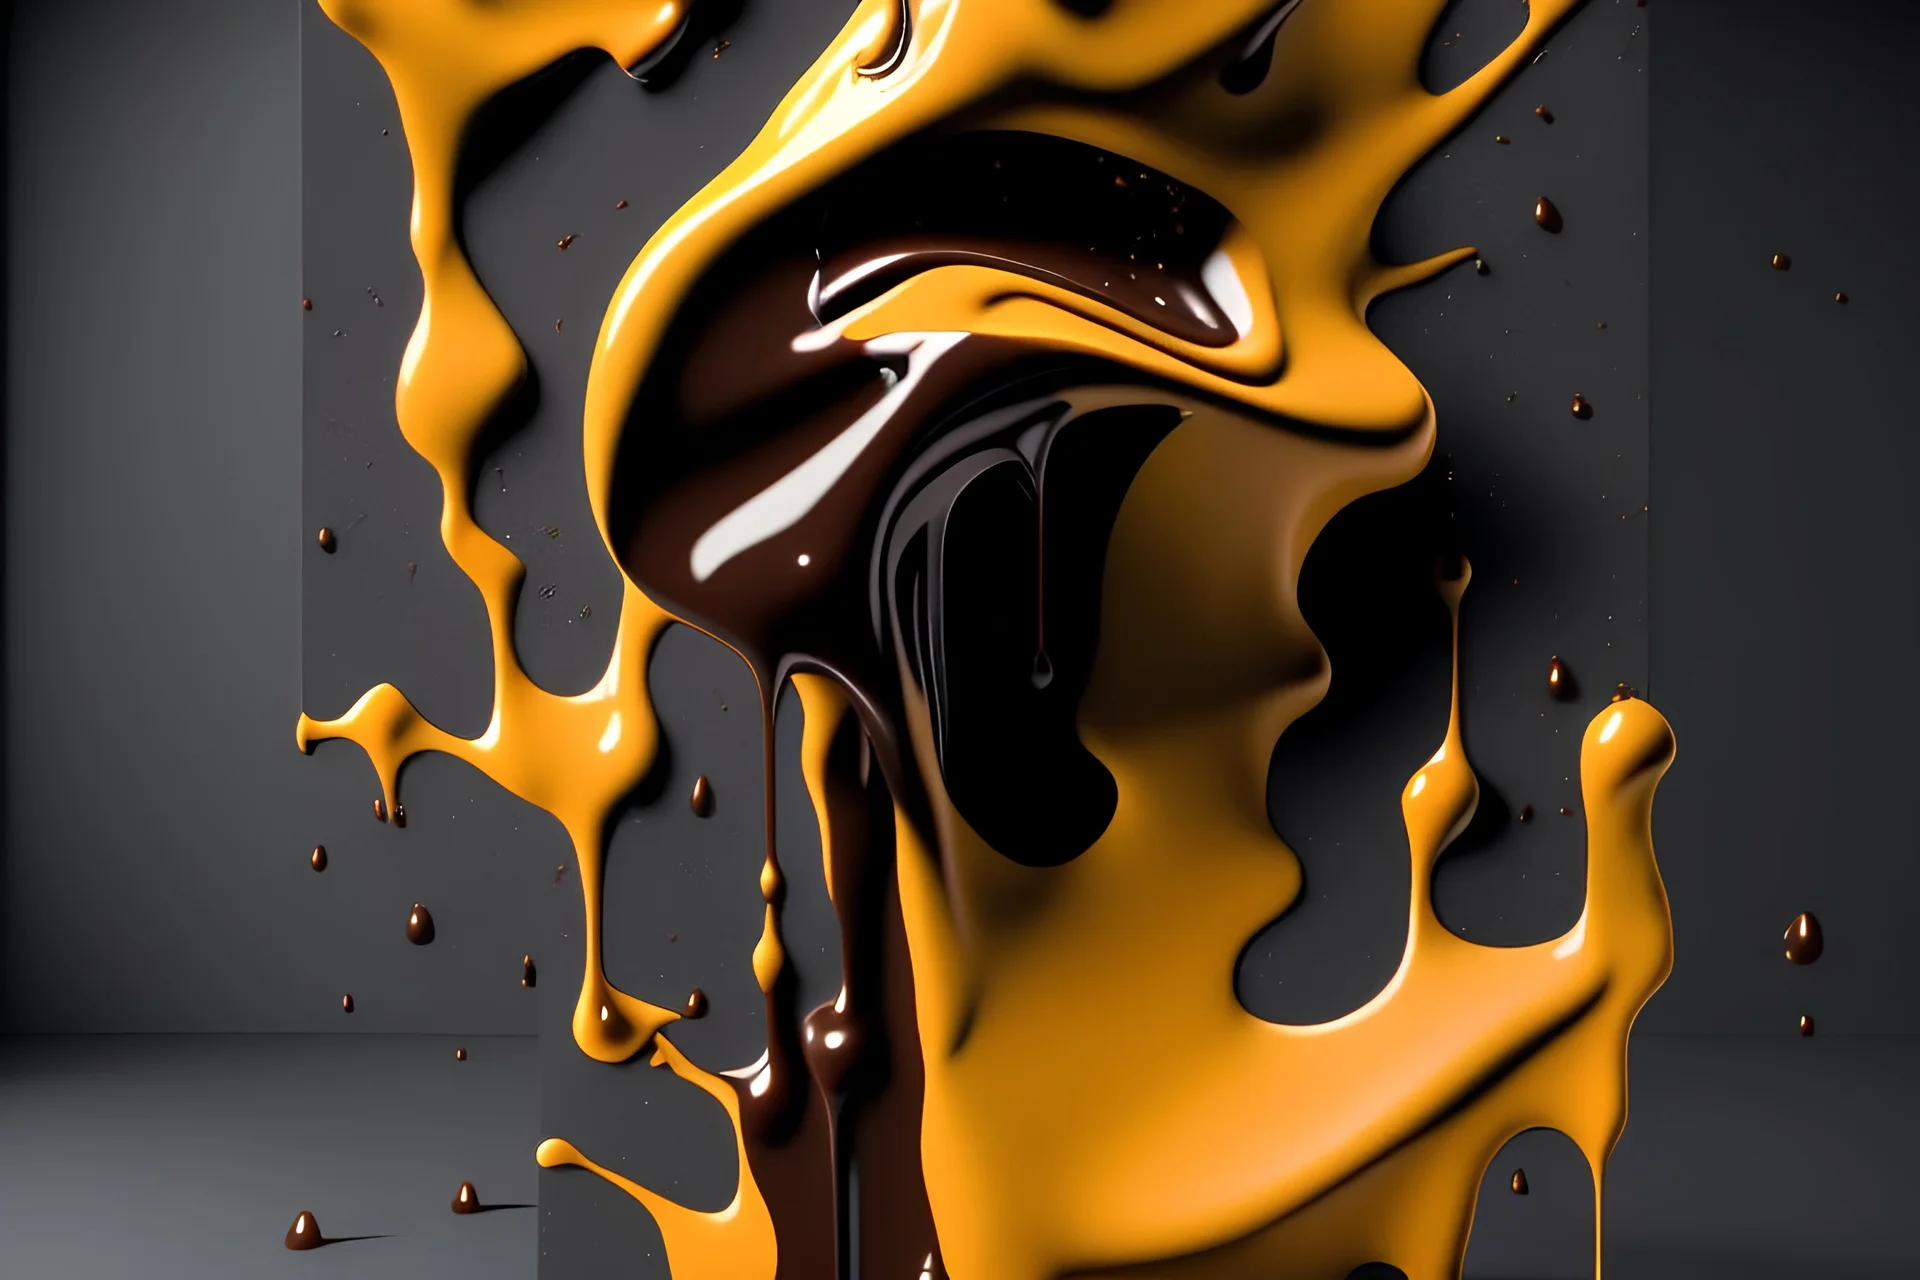 very dark grey canvas textured cloth environment and background, industrial light & magic 3d rendering, ilm, closeup portrait of extreme abstract art, fade into highly detailed splatart of equally mixed ( honey / maple syrup / milk / liquid chocolate / liquid caramel / strawberry syrup / vanilla sauce / hazelnut creme ), tasty, ultra large particle count, volumetric lighting, ambient occlusion, random 3d depth effects, reflective floor, clarity, purity, reflections equally